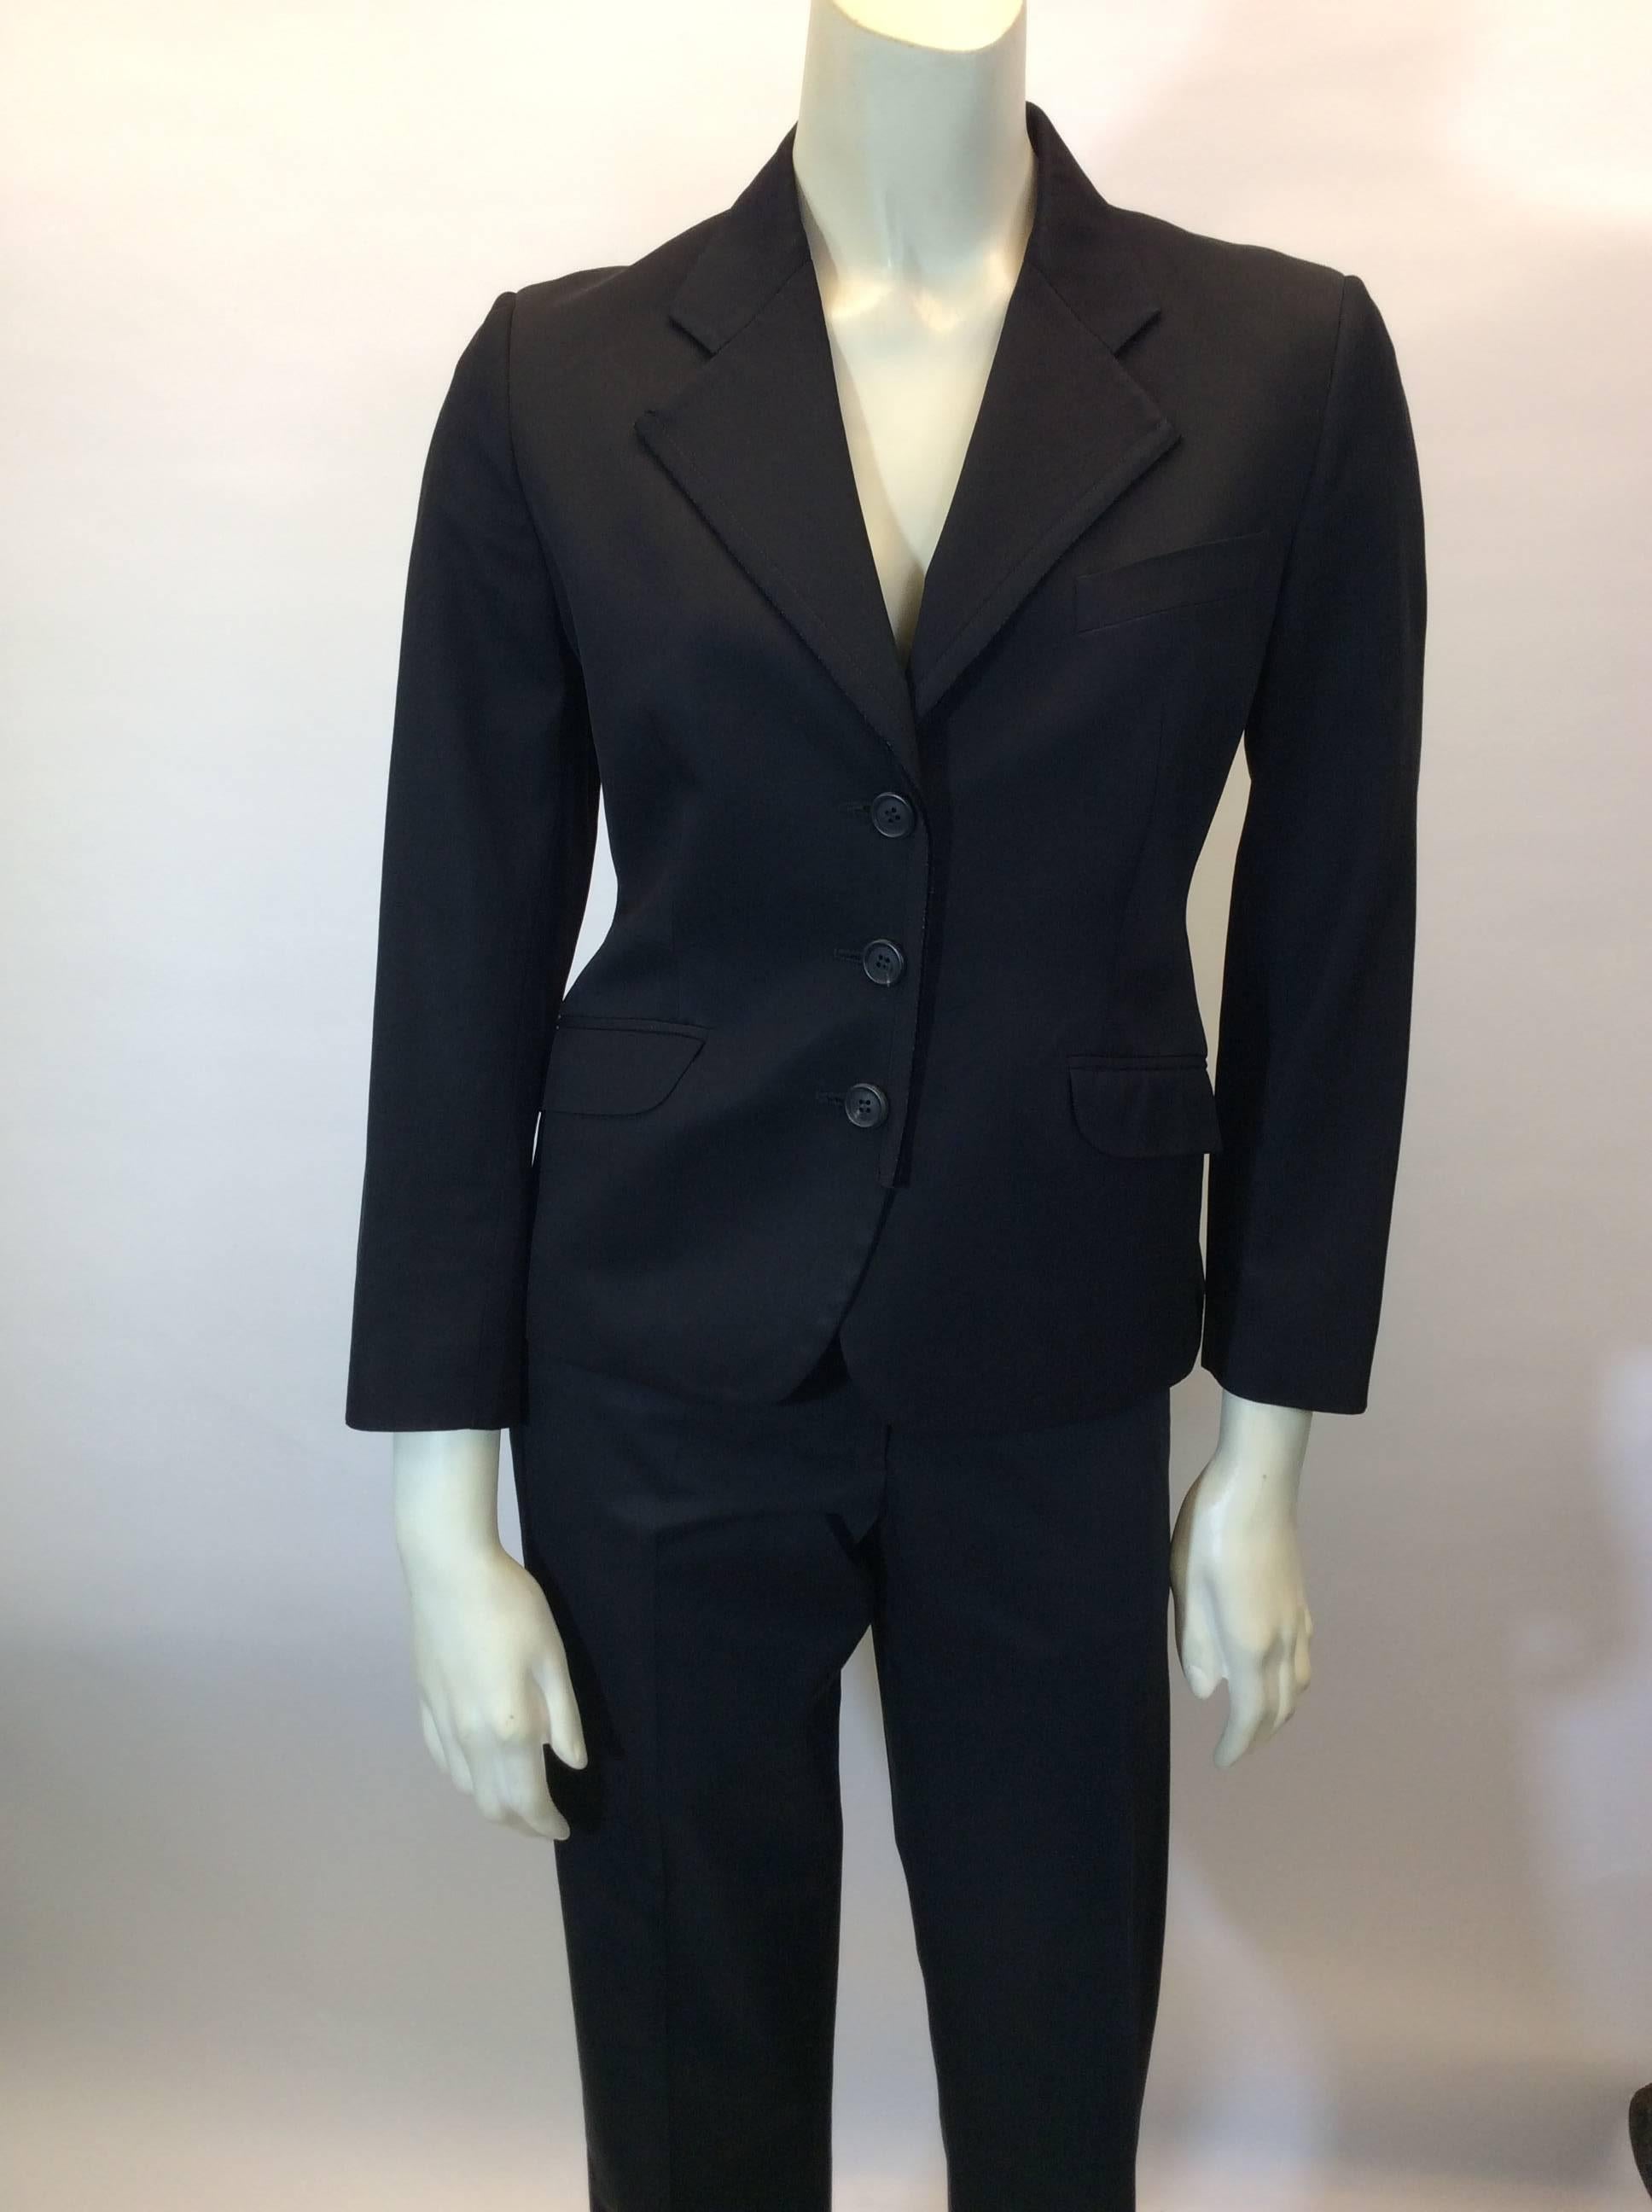 Black Pantsuit with 3 Button Blazer
Unfinished edge details on blazer
Blazer features two hip pockets and one chest pocket
Single breasted
Full length straight leg trouser
Size 42
97% Cotton, 3% Other fibers